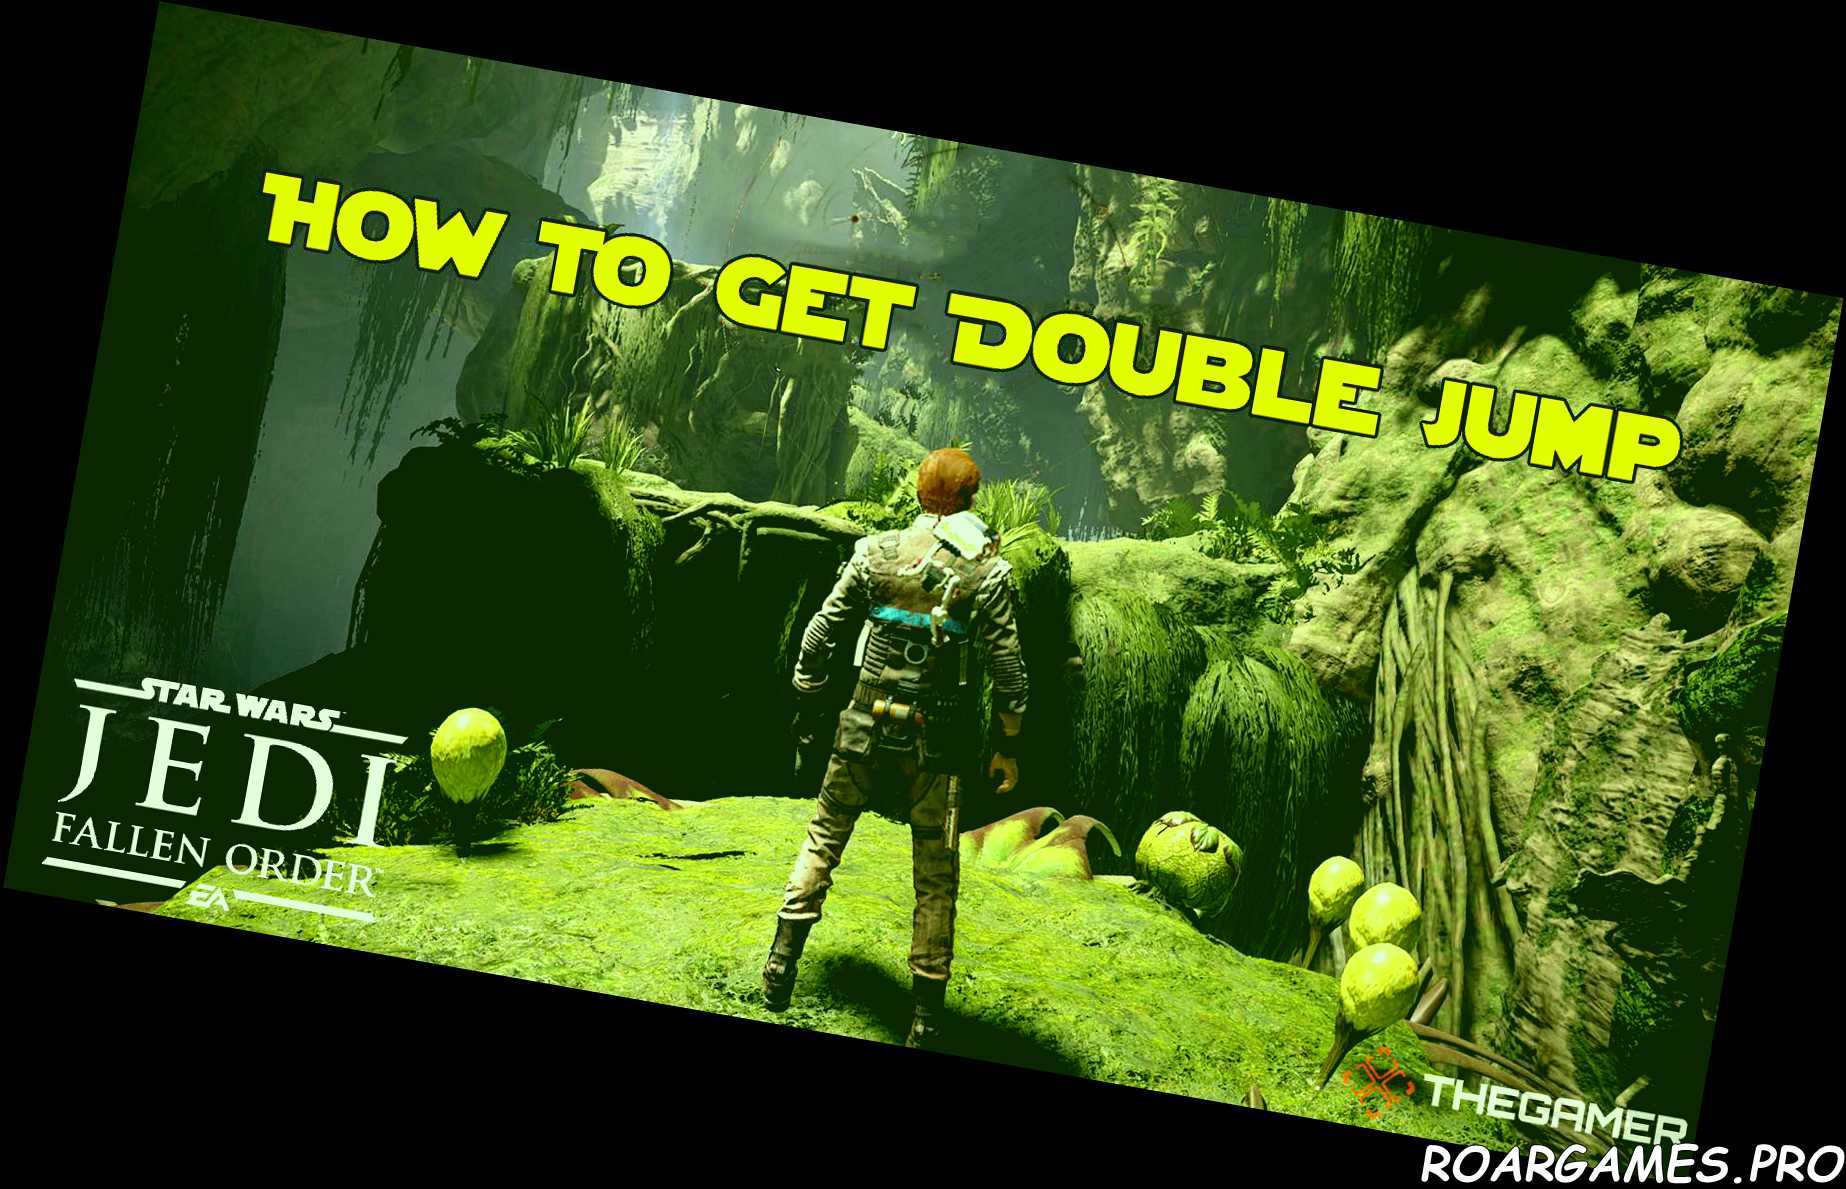 How To Get Double Jump In Star Wars Jedi Fallen Order